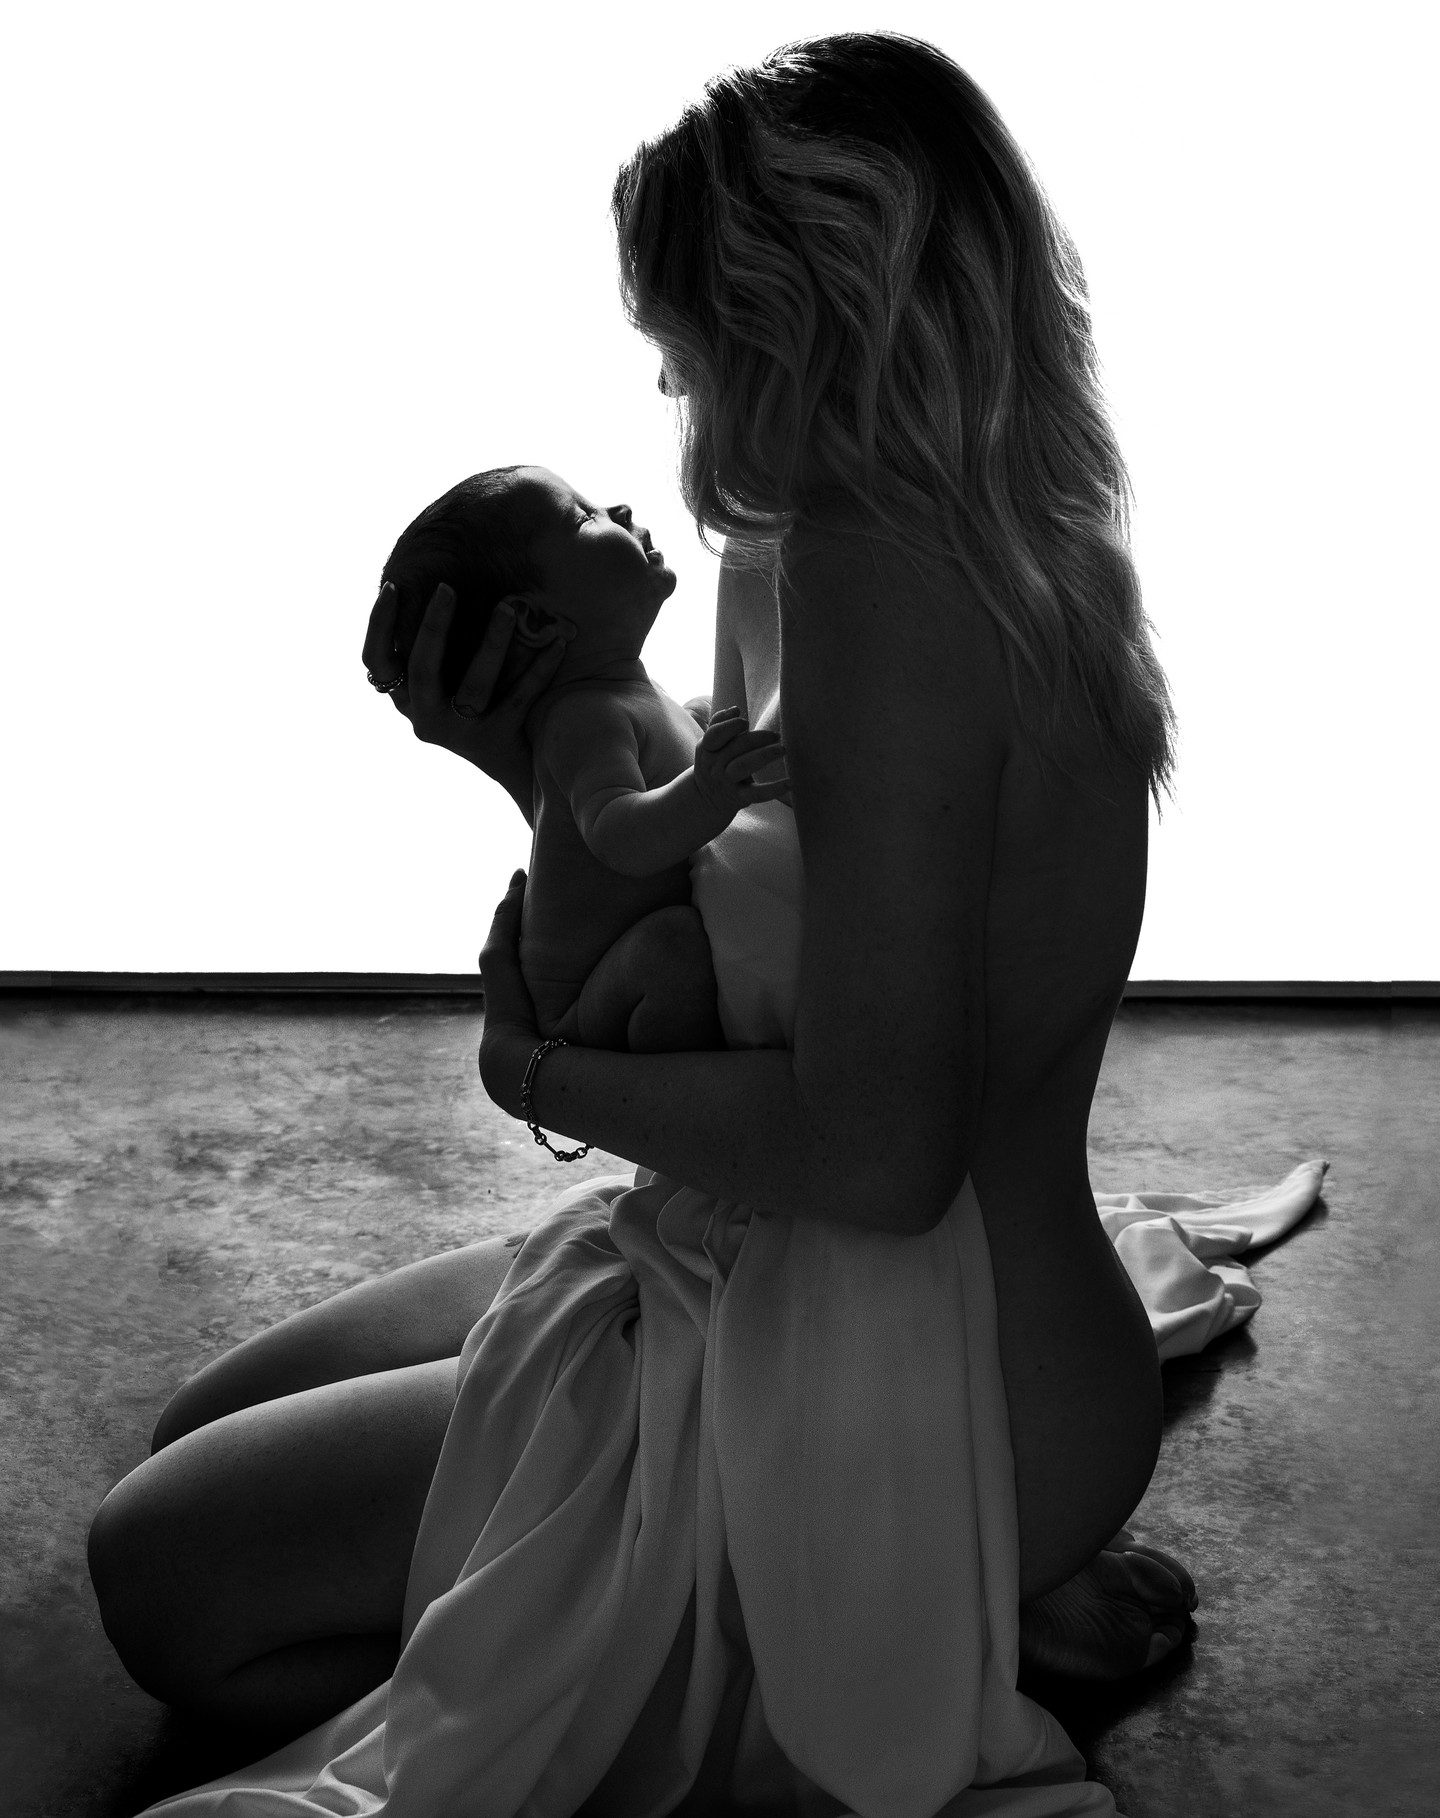 New born and maternity photographer in San Francisco. Photograph of mother with newborn baby.